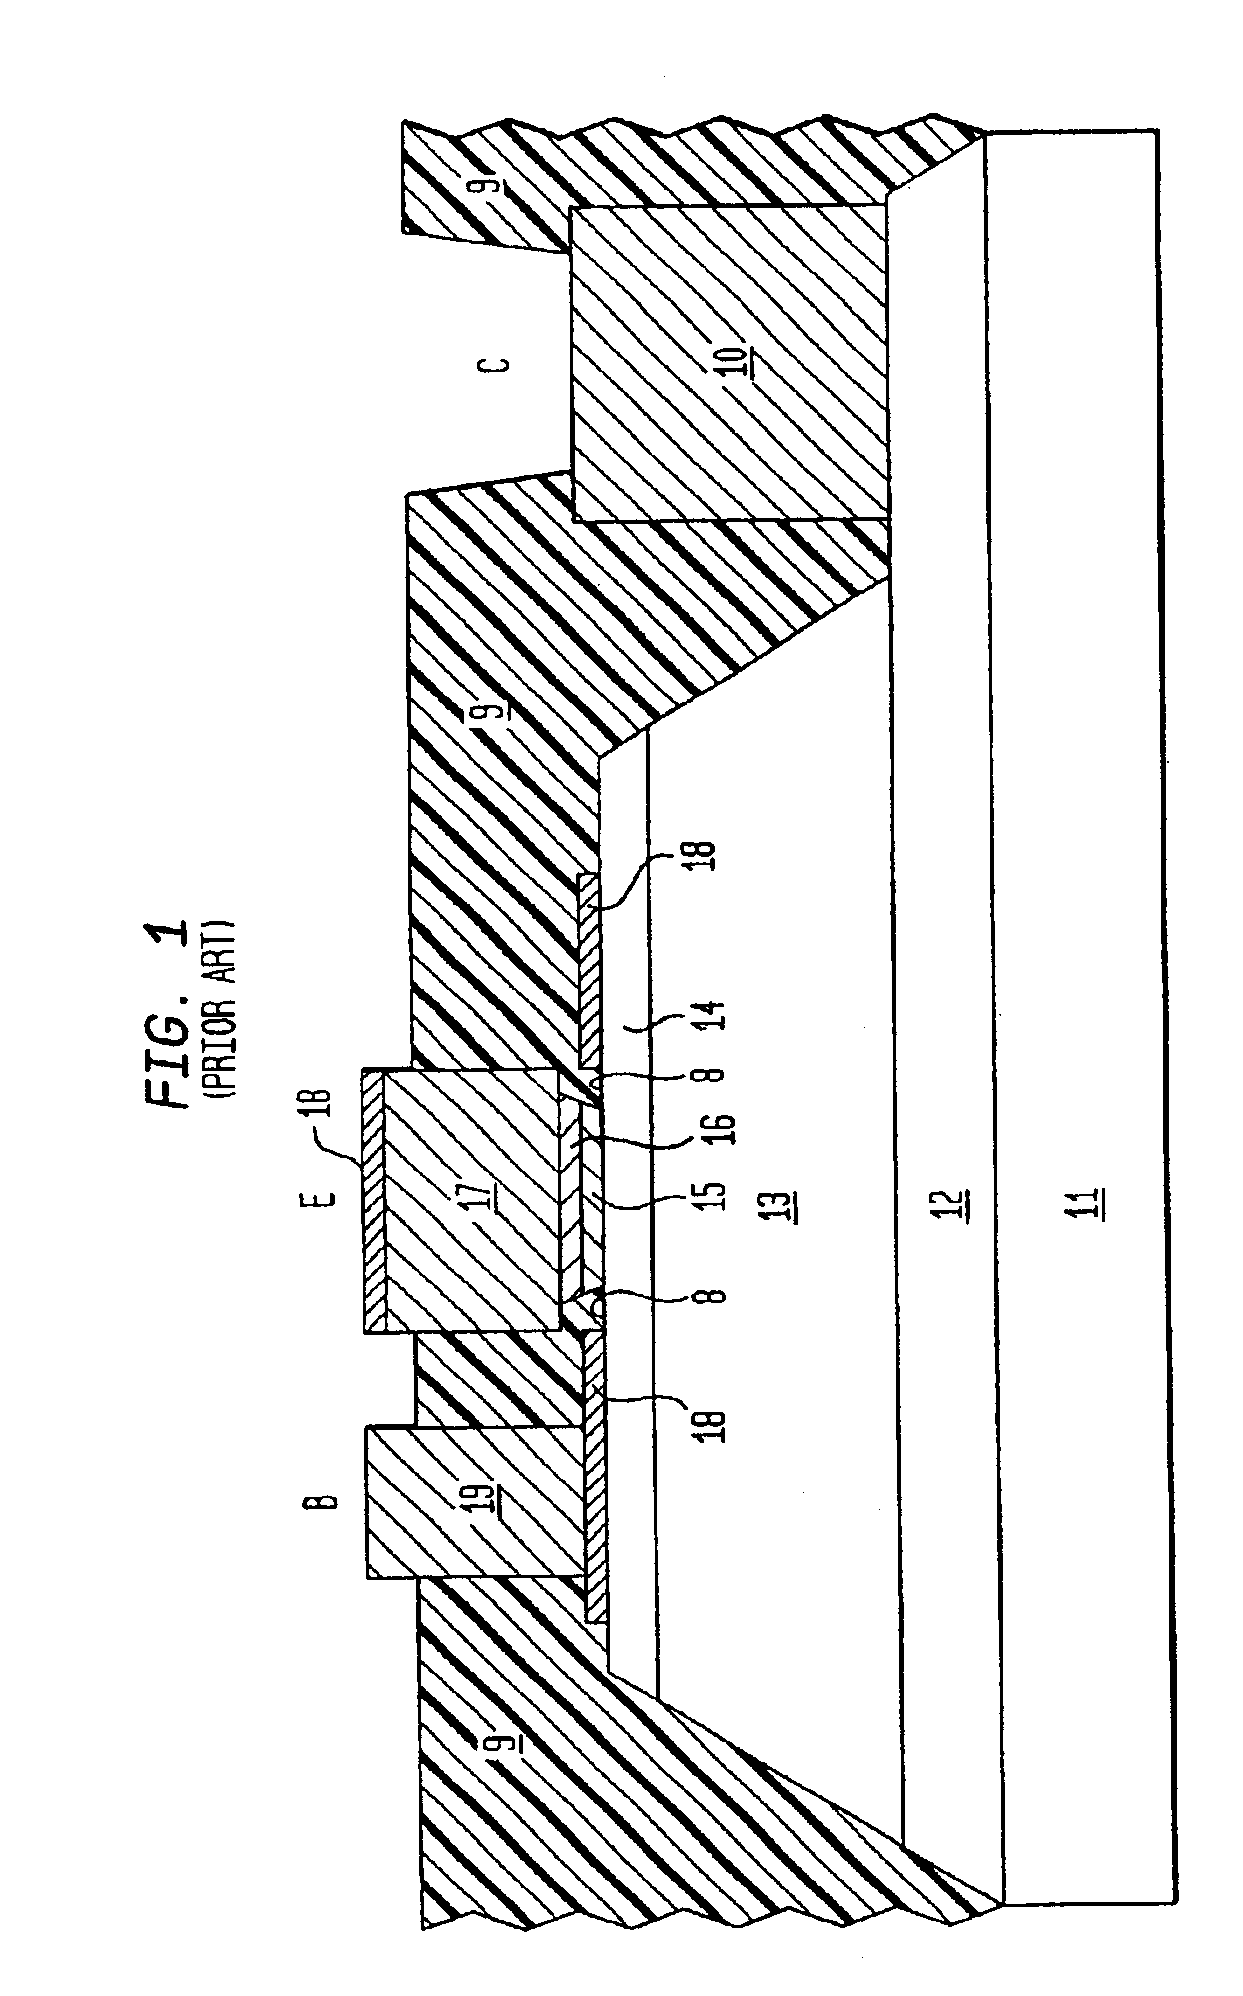 Method and apparatus for a self-aligned heterojunction bipolar transistor using dielectric assisted metal liftoff process